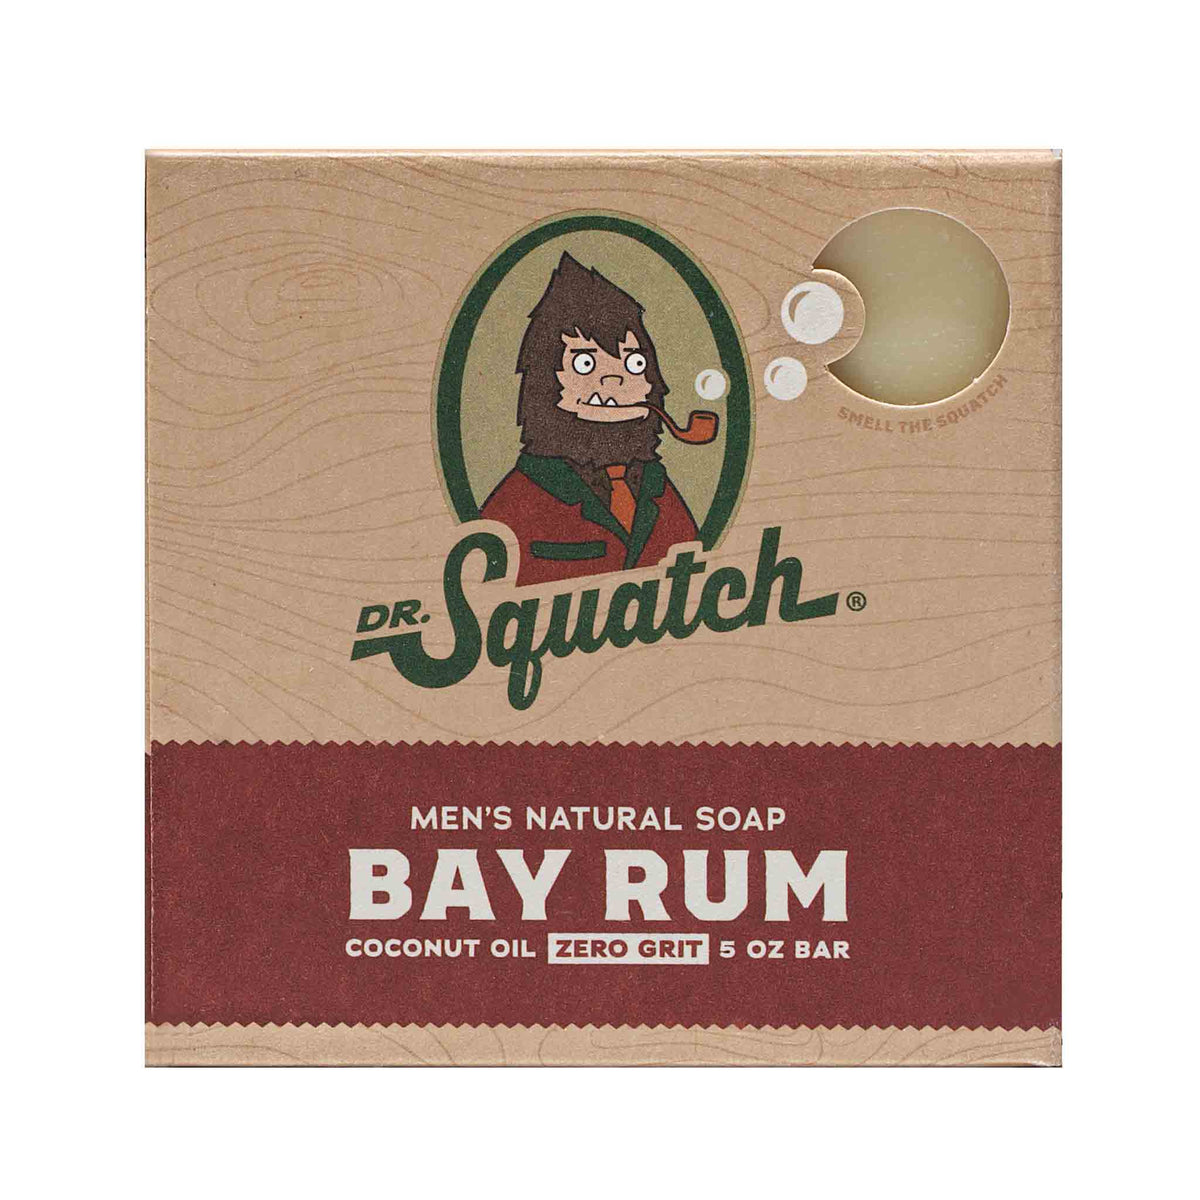 Dr. Squatch - Bay Rum Soap Bar I The Kings of Styling